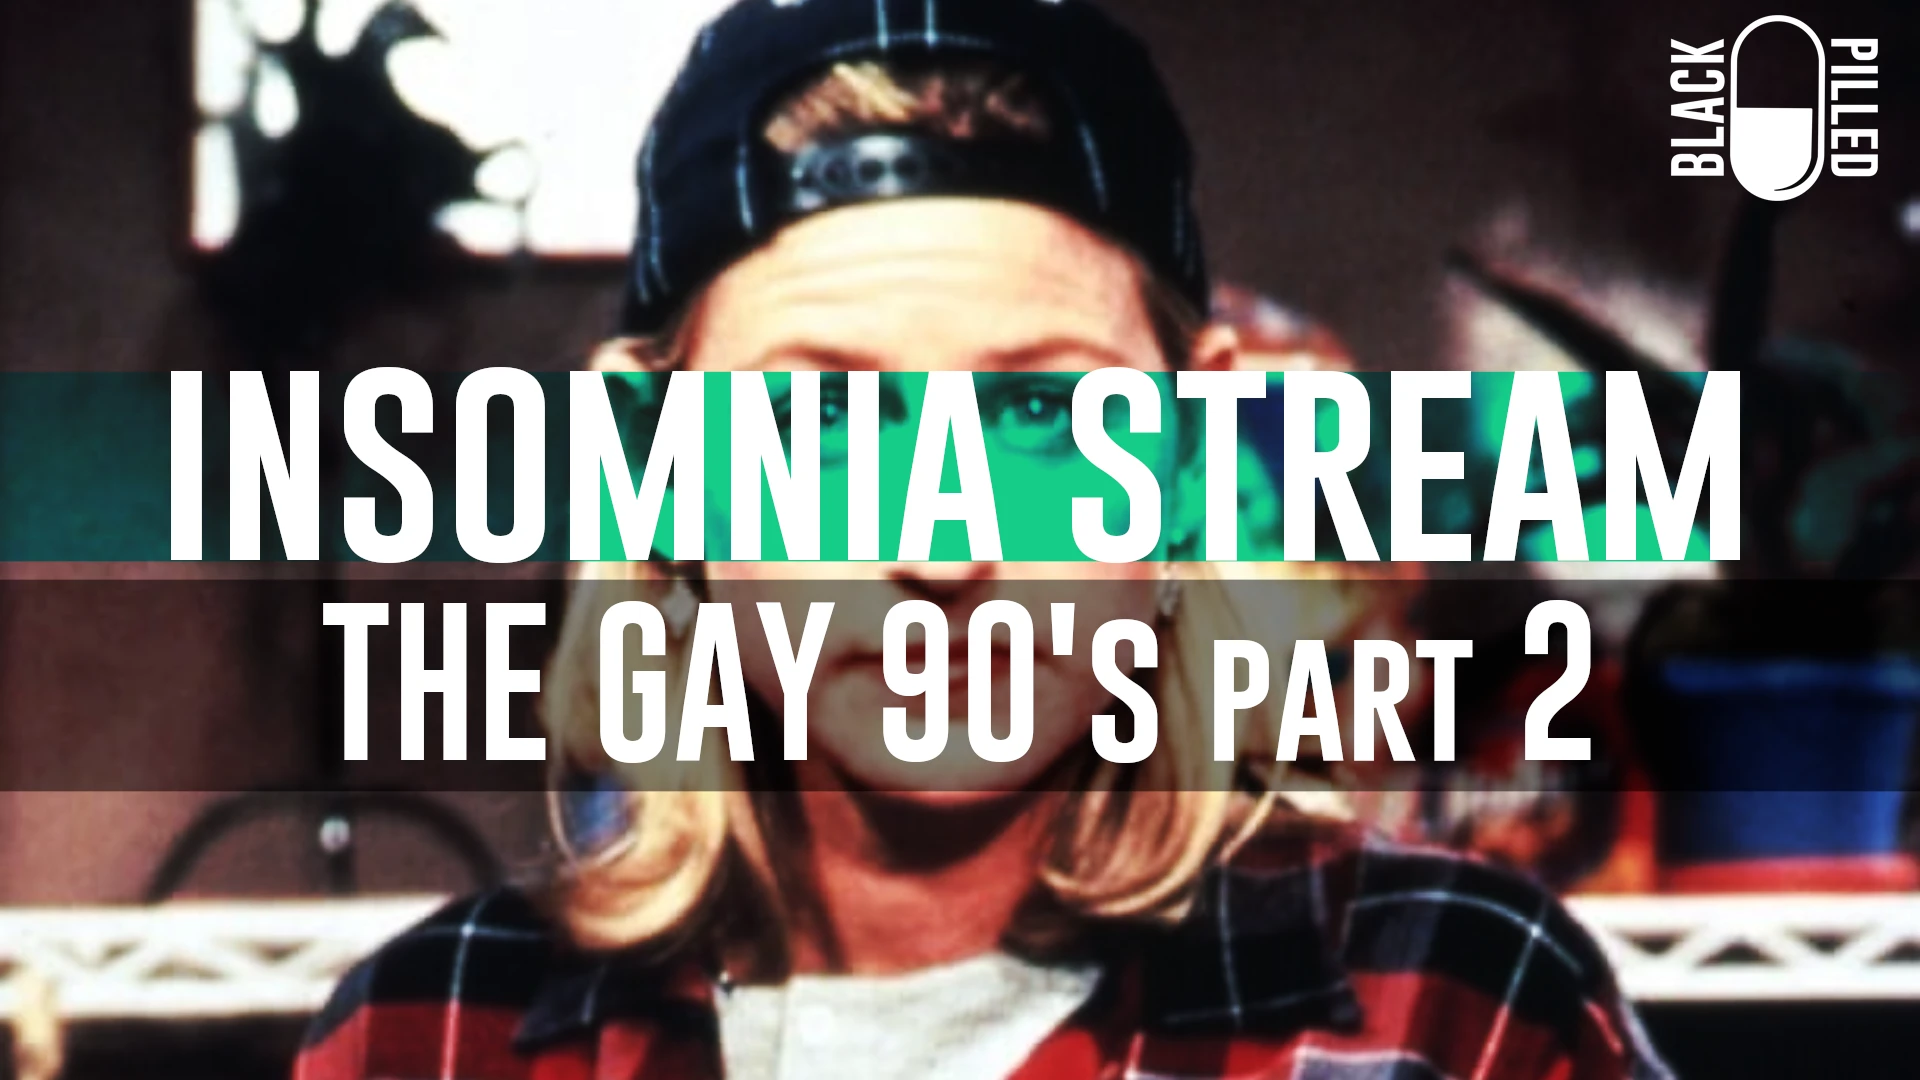 INSOMNIA STREAM: THE GAY 90’s part 2